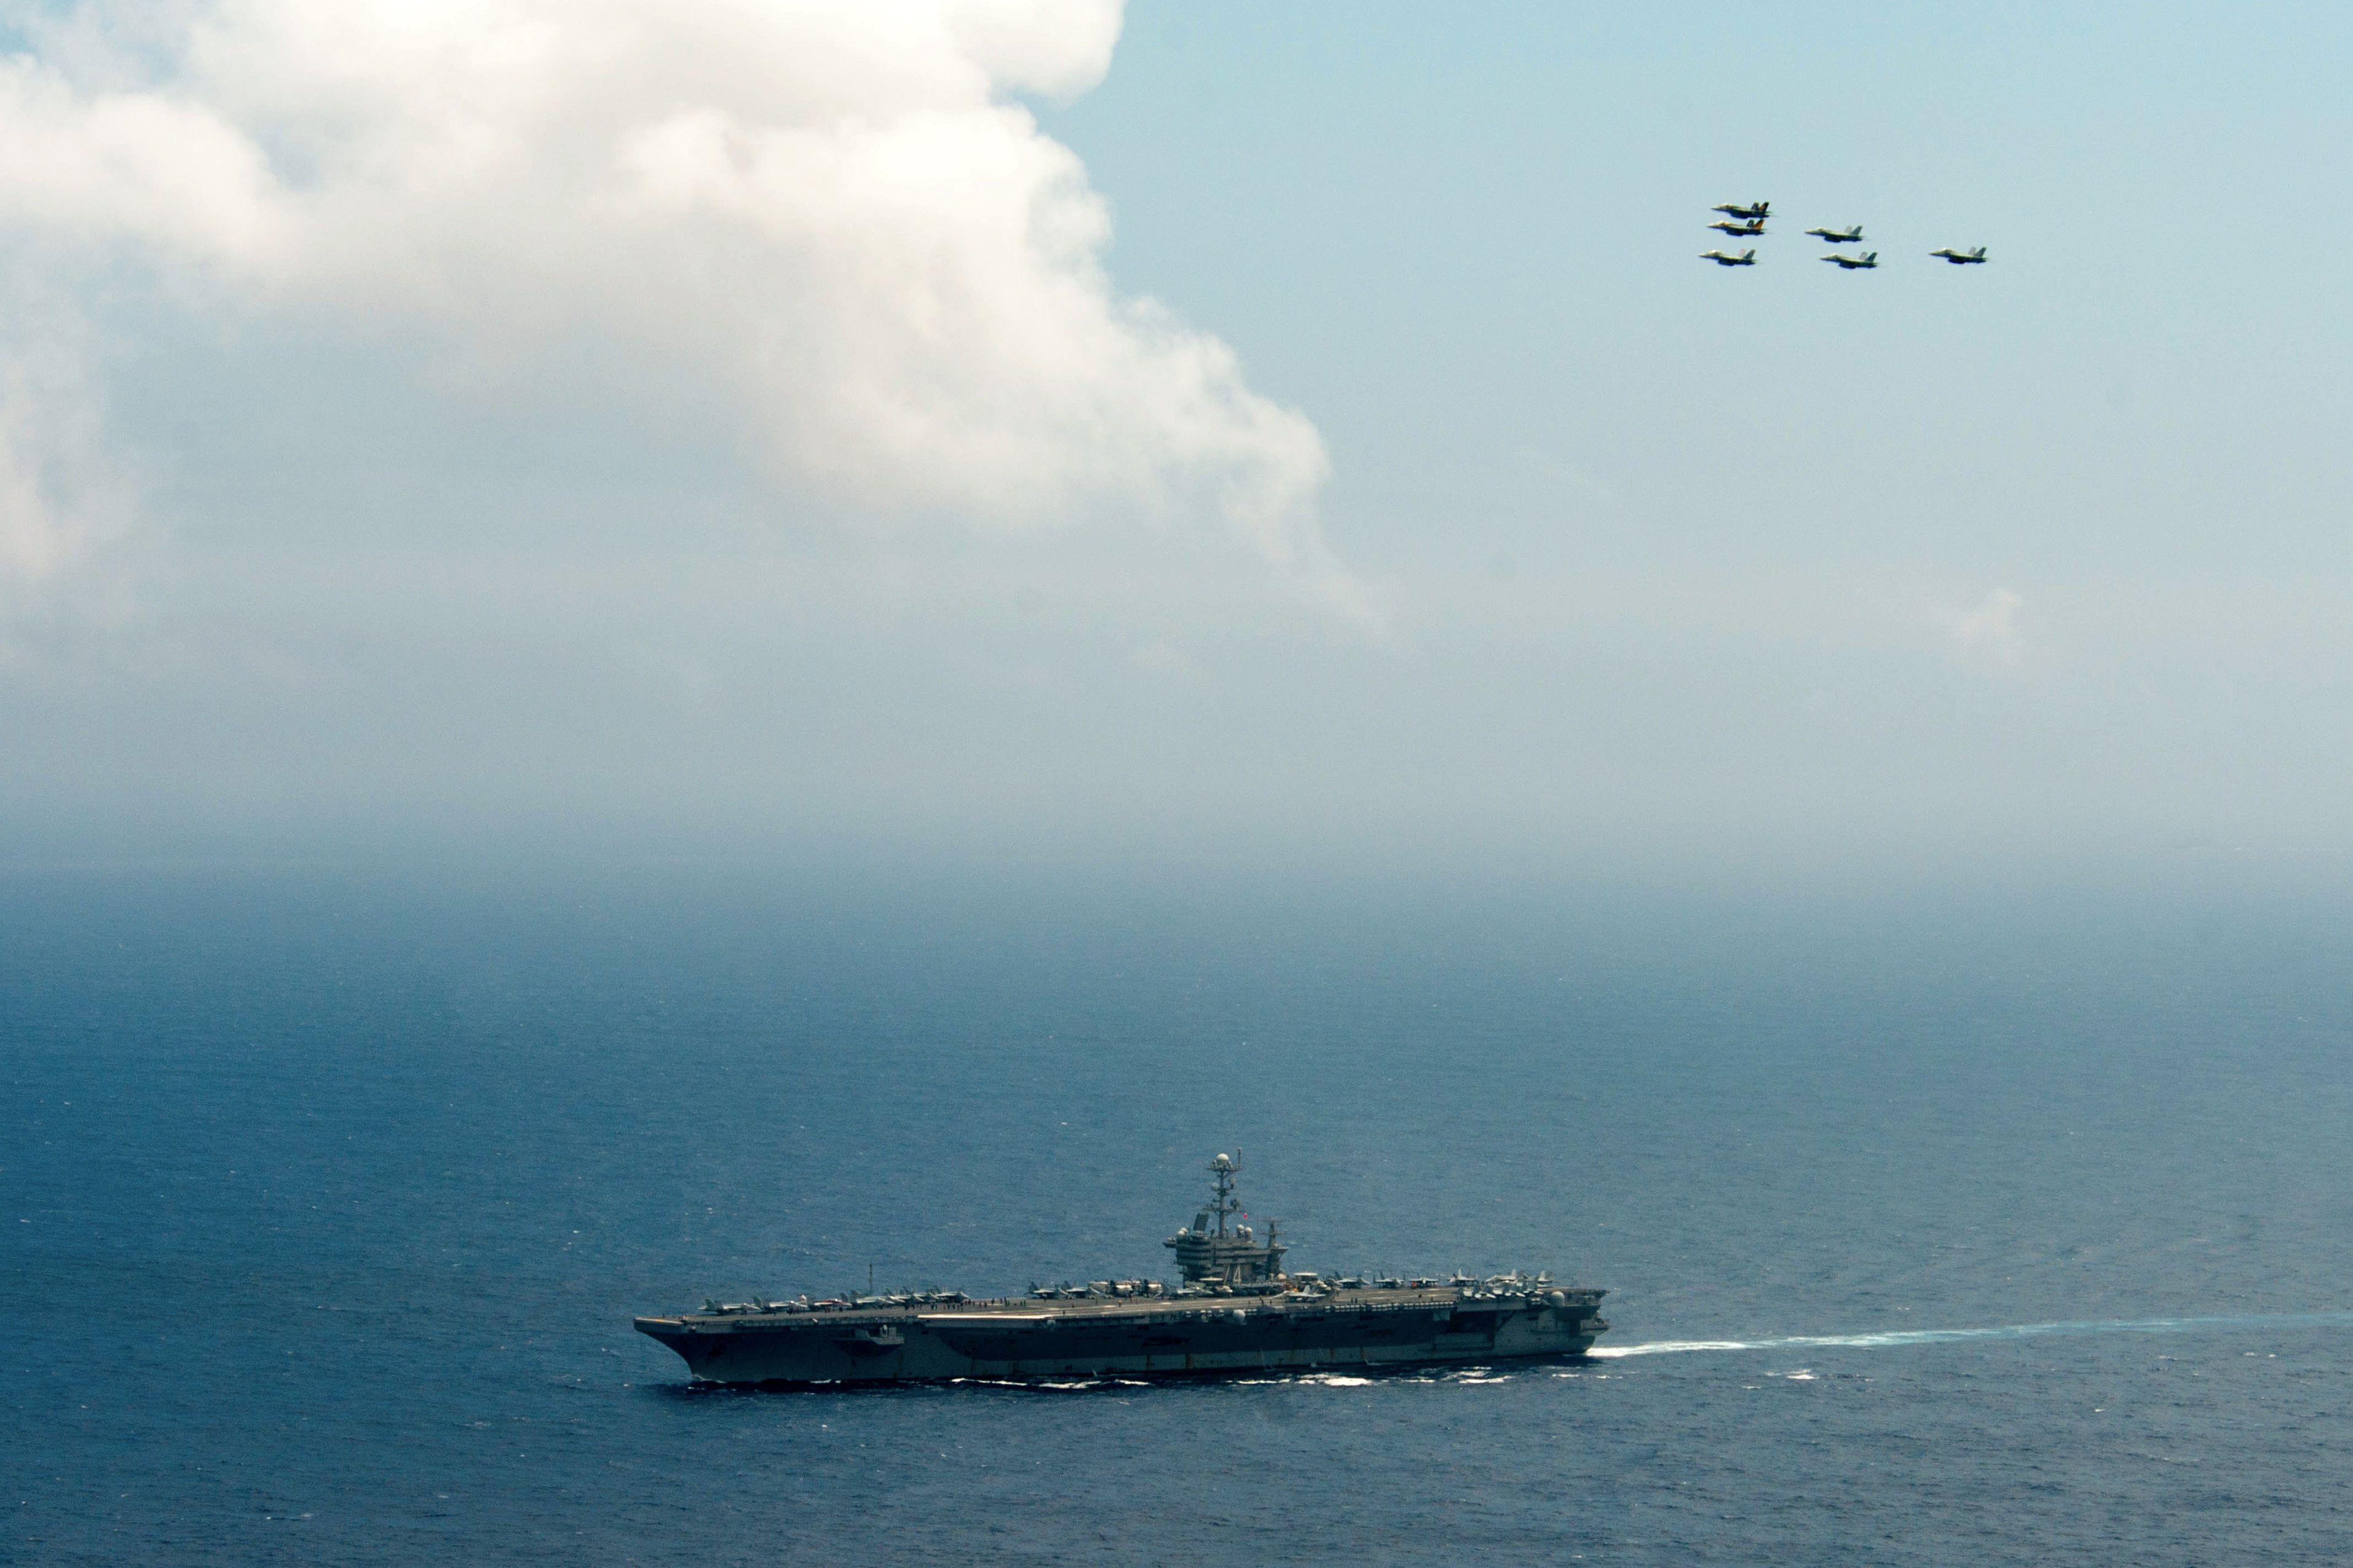 This photo taken on June 18, 2016 and released June 19, 2016 by the US Navy shows a flight formation from Carrier Air Wing (CVW) 5 and 9 above the Nimitz-class aircraft carrier USS John C. Stennis (CVN-74) in the Philippine Sea. Two US aircraft carriers have started exercises in the Philippine Sea, defence officials said June 19, as Washington's close ally Manila faces growing pressure from Beijing in the South China Sea. / AFP PHOTO / US NAVY / TOMAS COMPIAN / RESTRICTED TO EDITORIAL USE - MANDATORY CREDIT "AFP PHOTO / US NAVY / TOMAS COMPIAN" - NO MARKETING NO ADVERTISING CAMPAIGNS - DISTRIBUTED AS A SERVICE TO CLIENTS